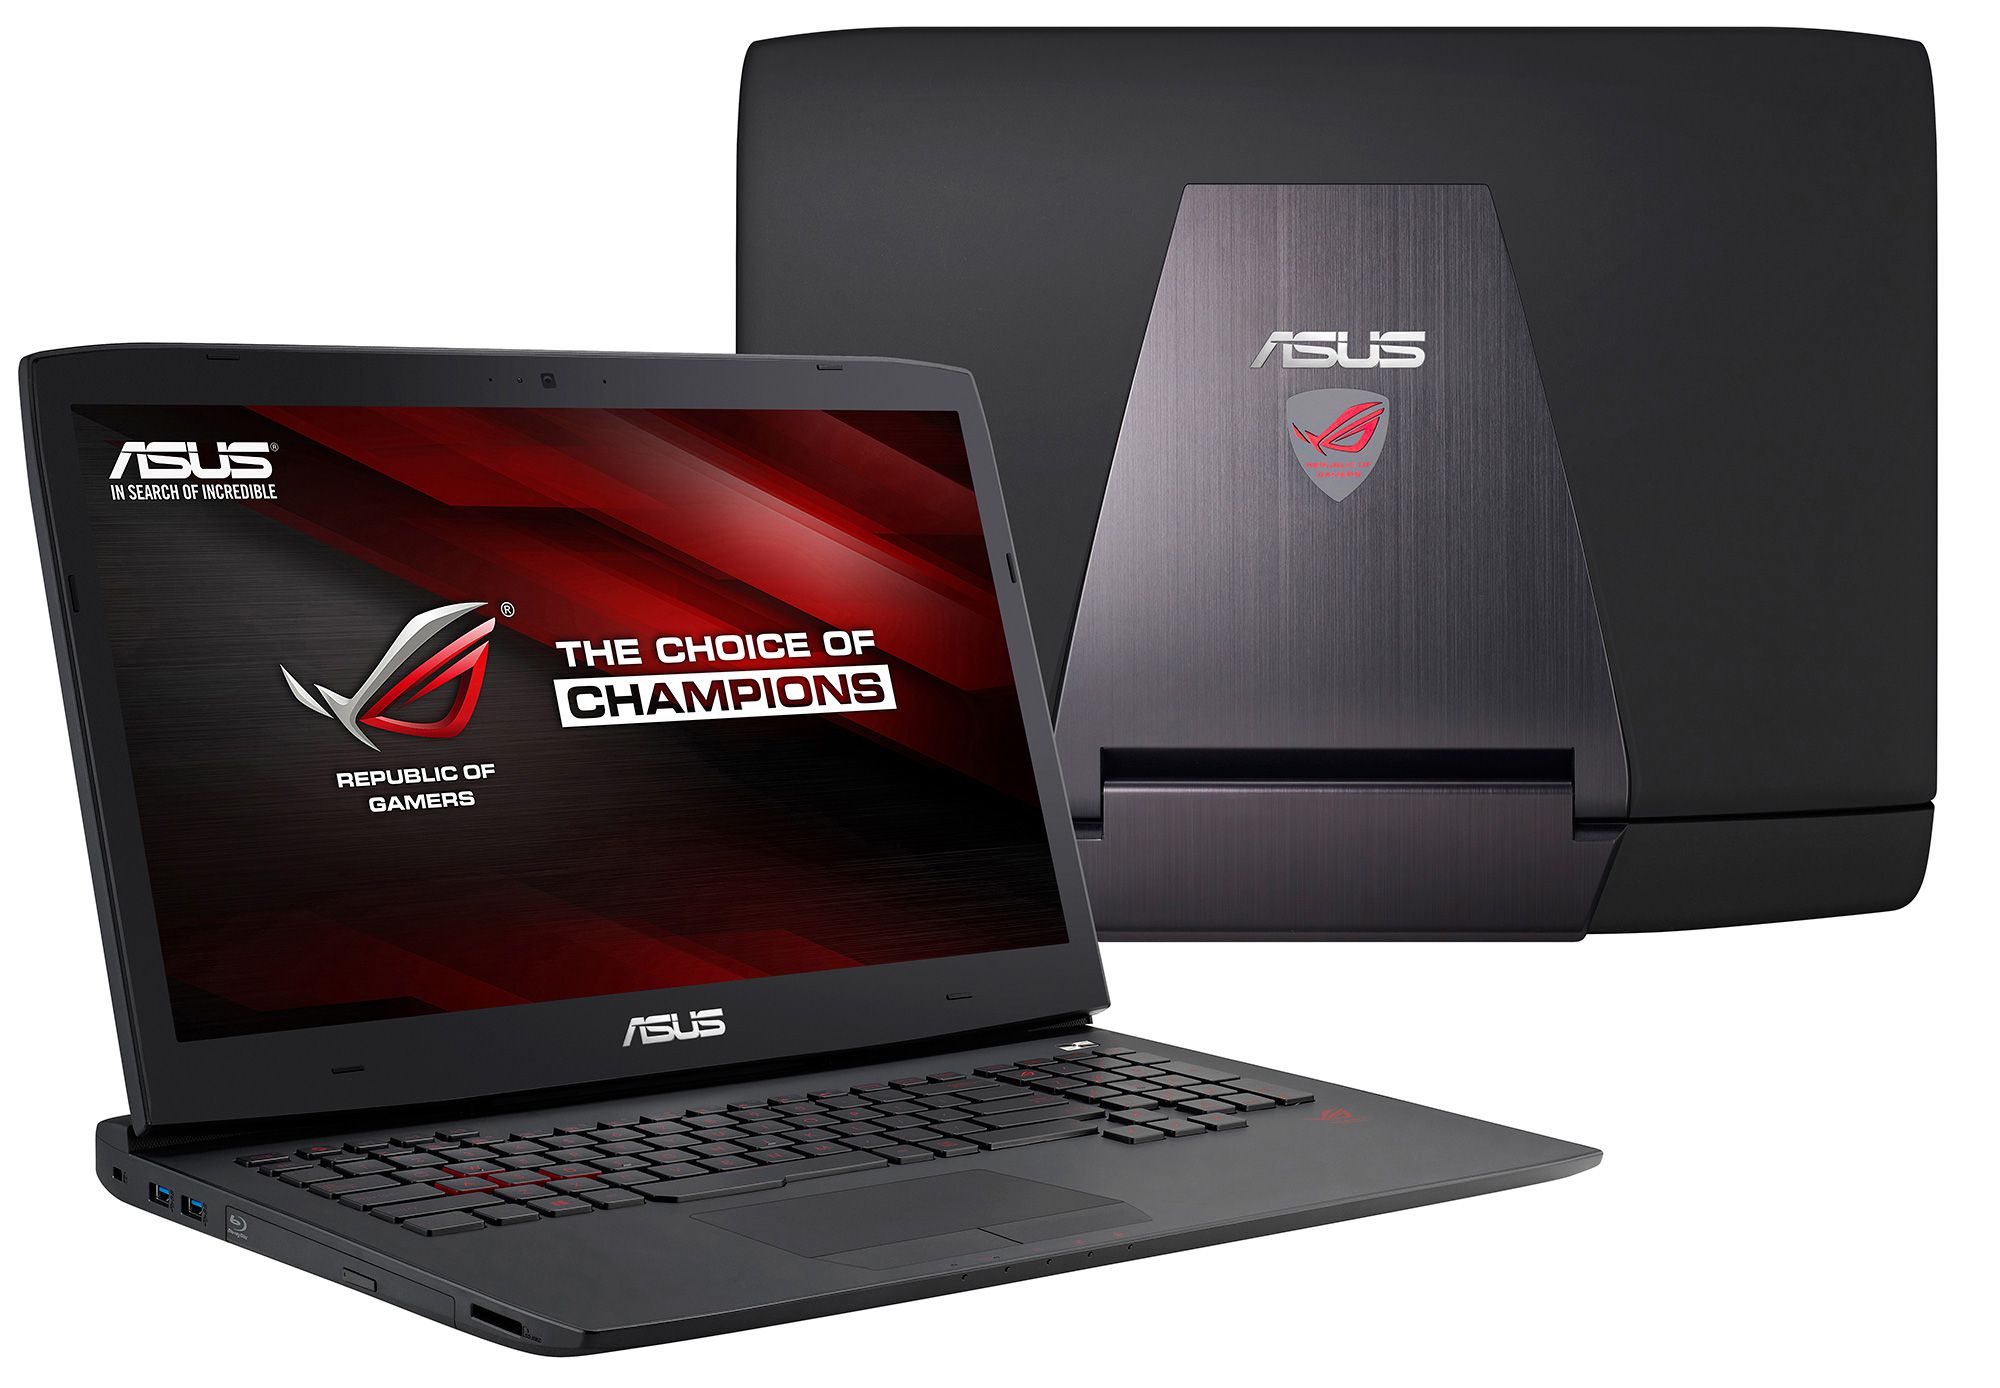 Asus Direct Console Windows 7